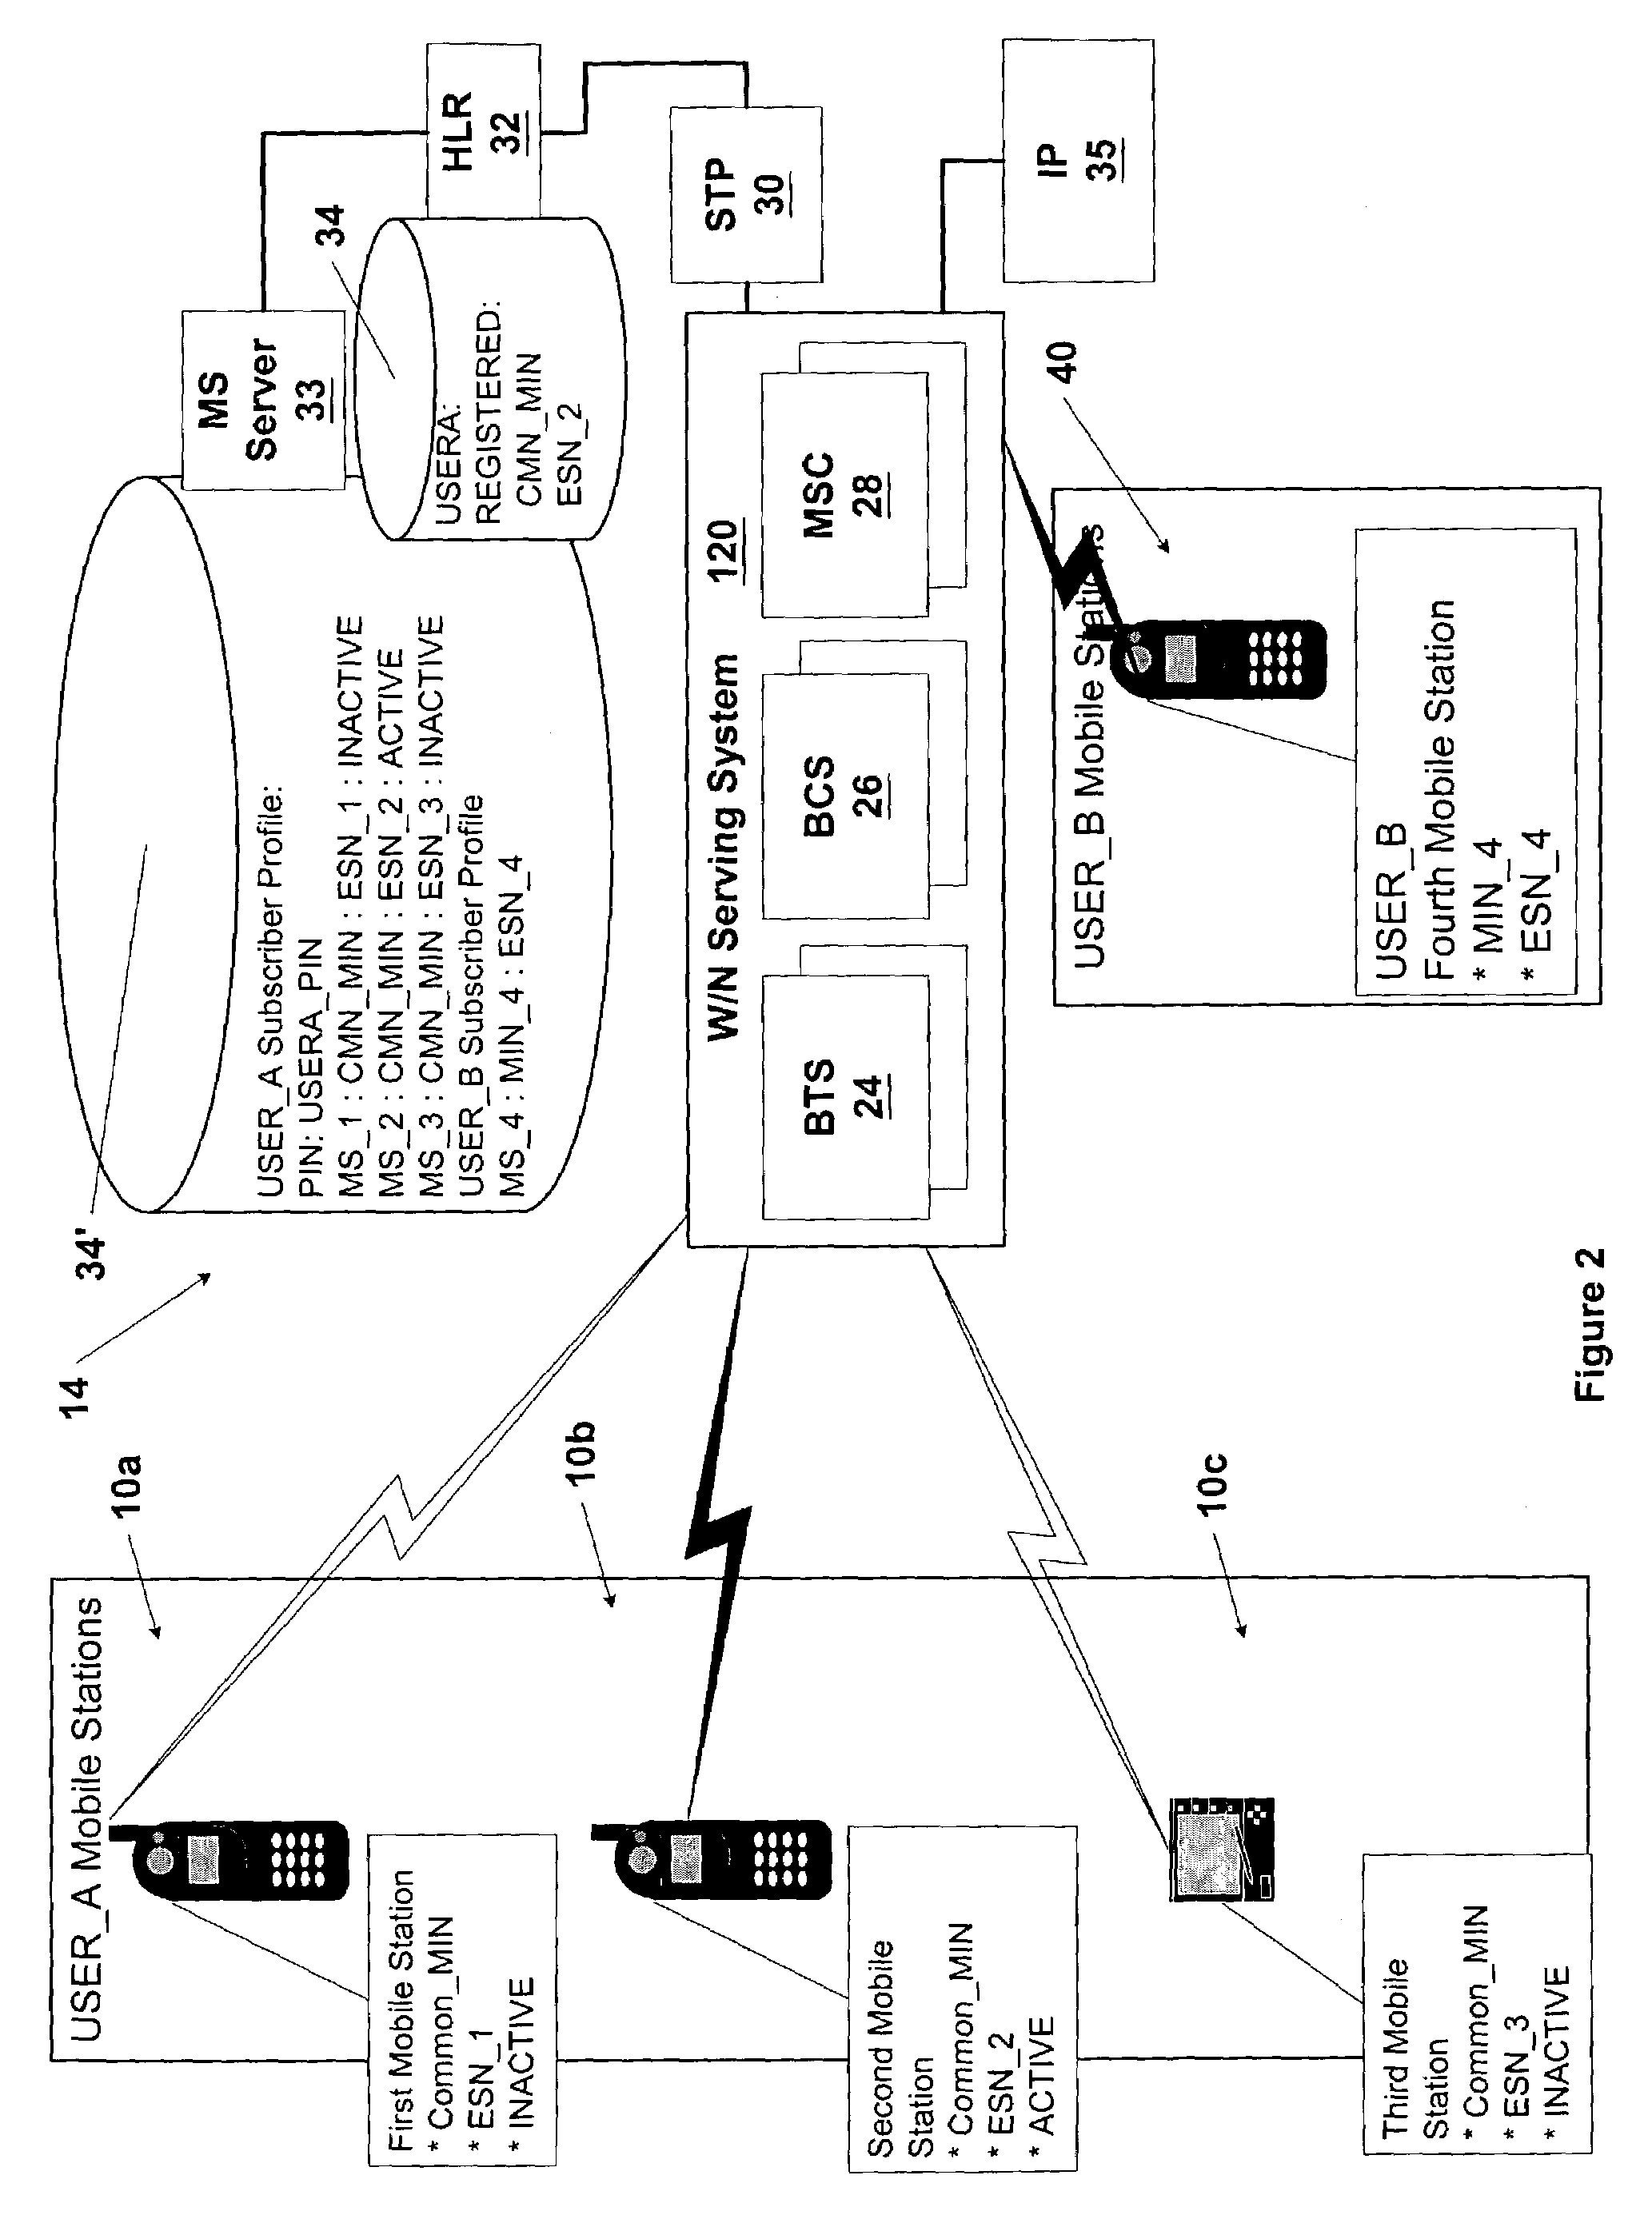 Method and system for controlling service to multiple mobile stations having a common subscriber identifier